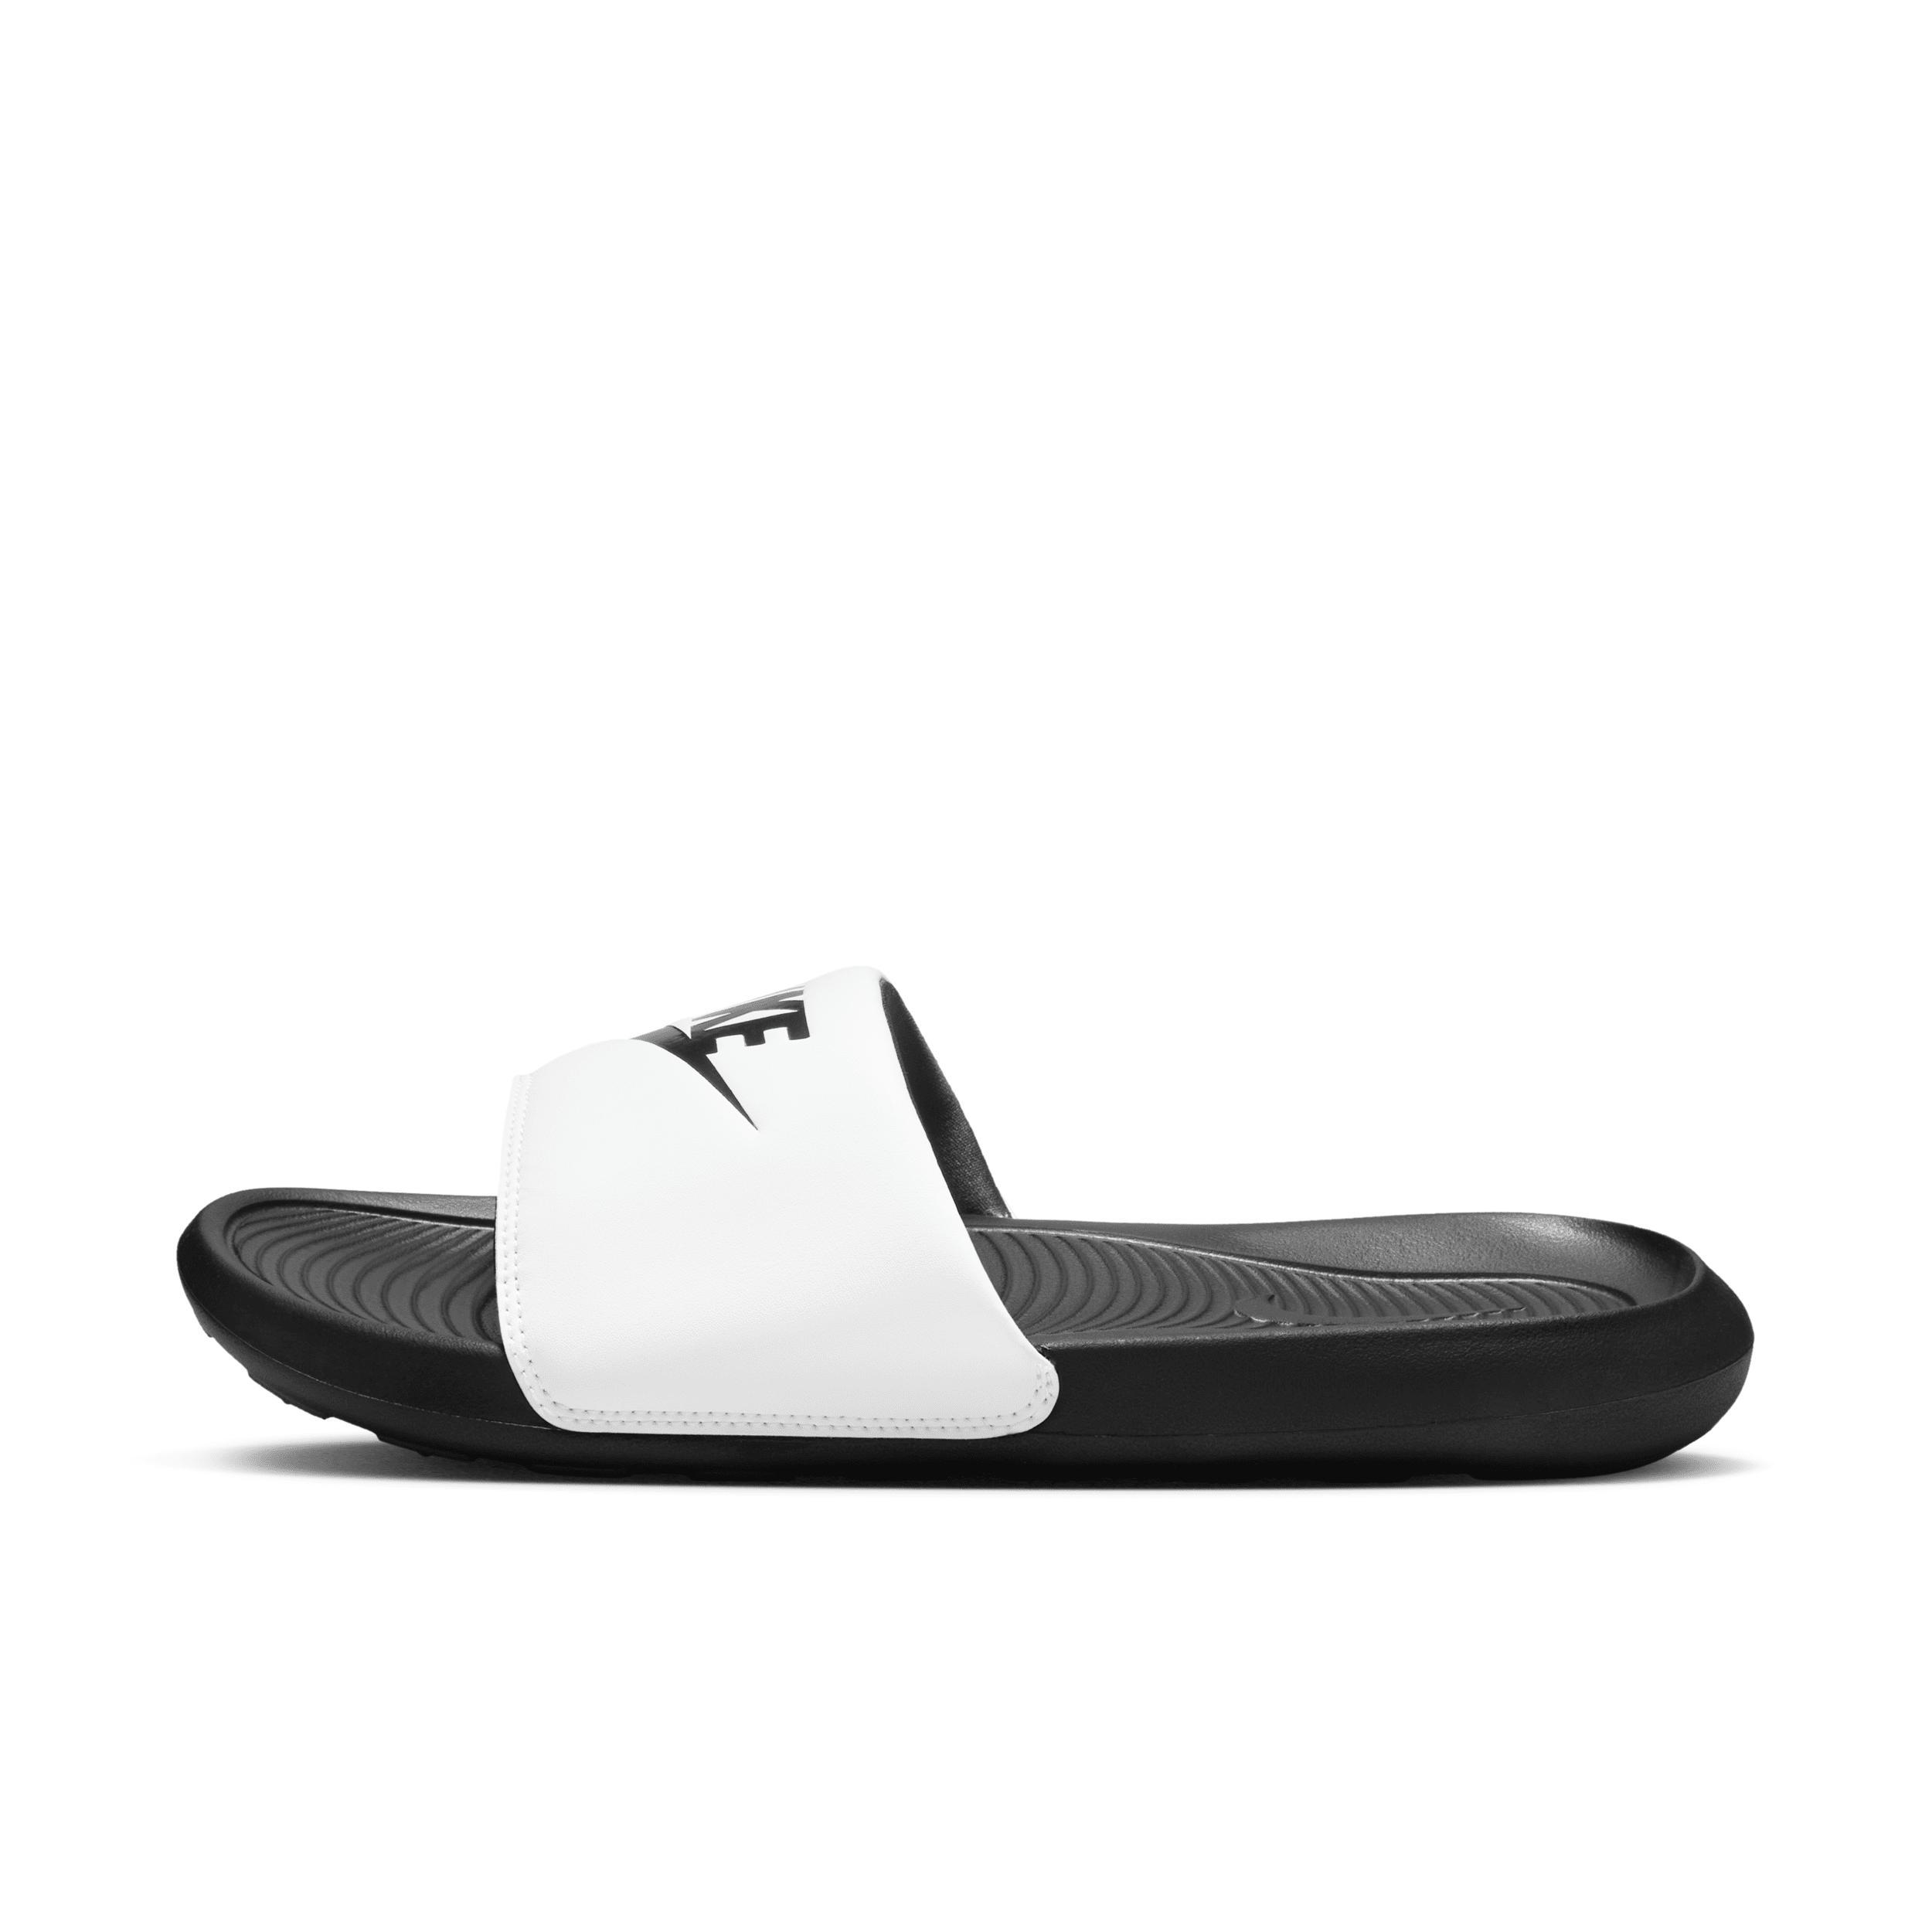 Nike Victori One Mens Slide Sandals Oxford Product Image